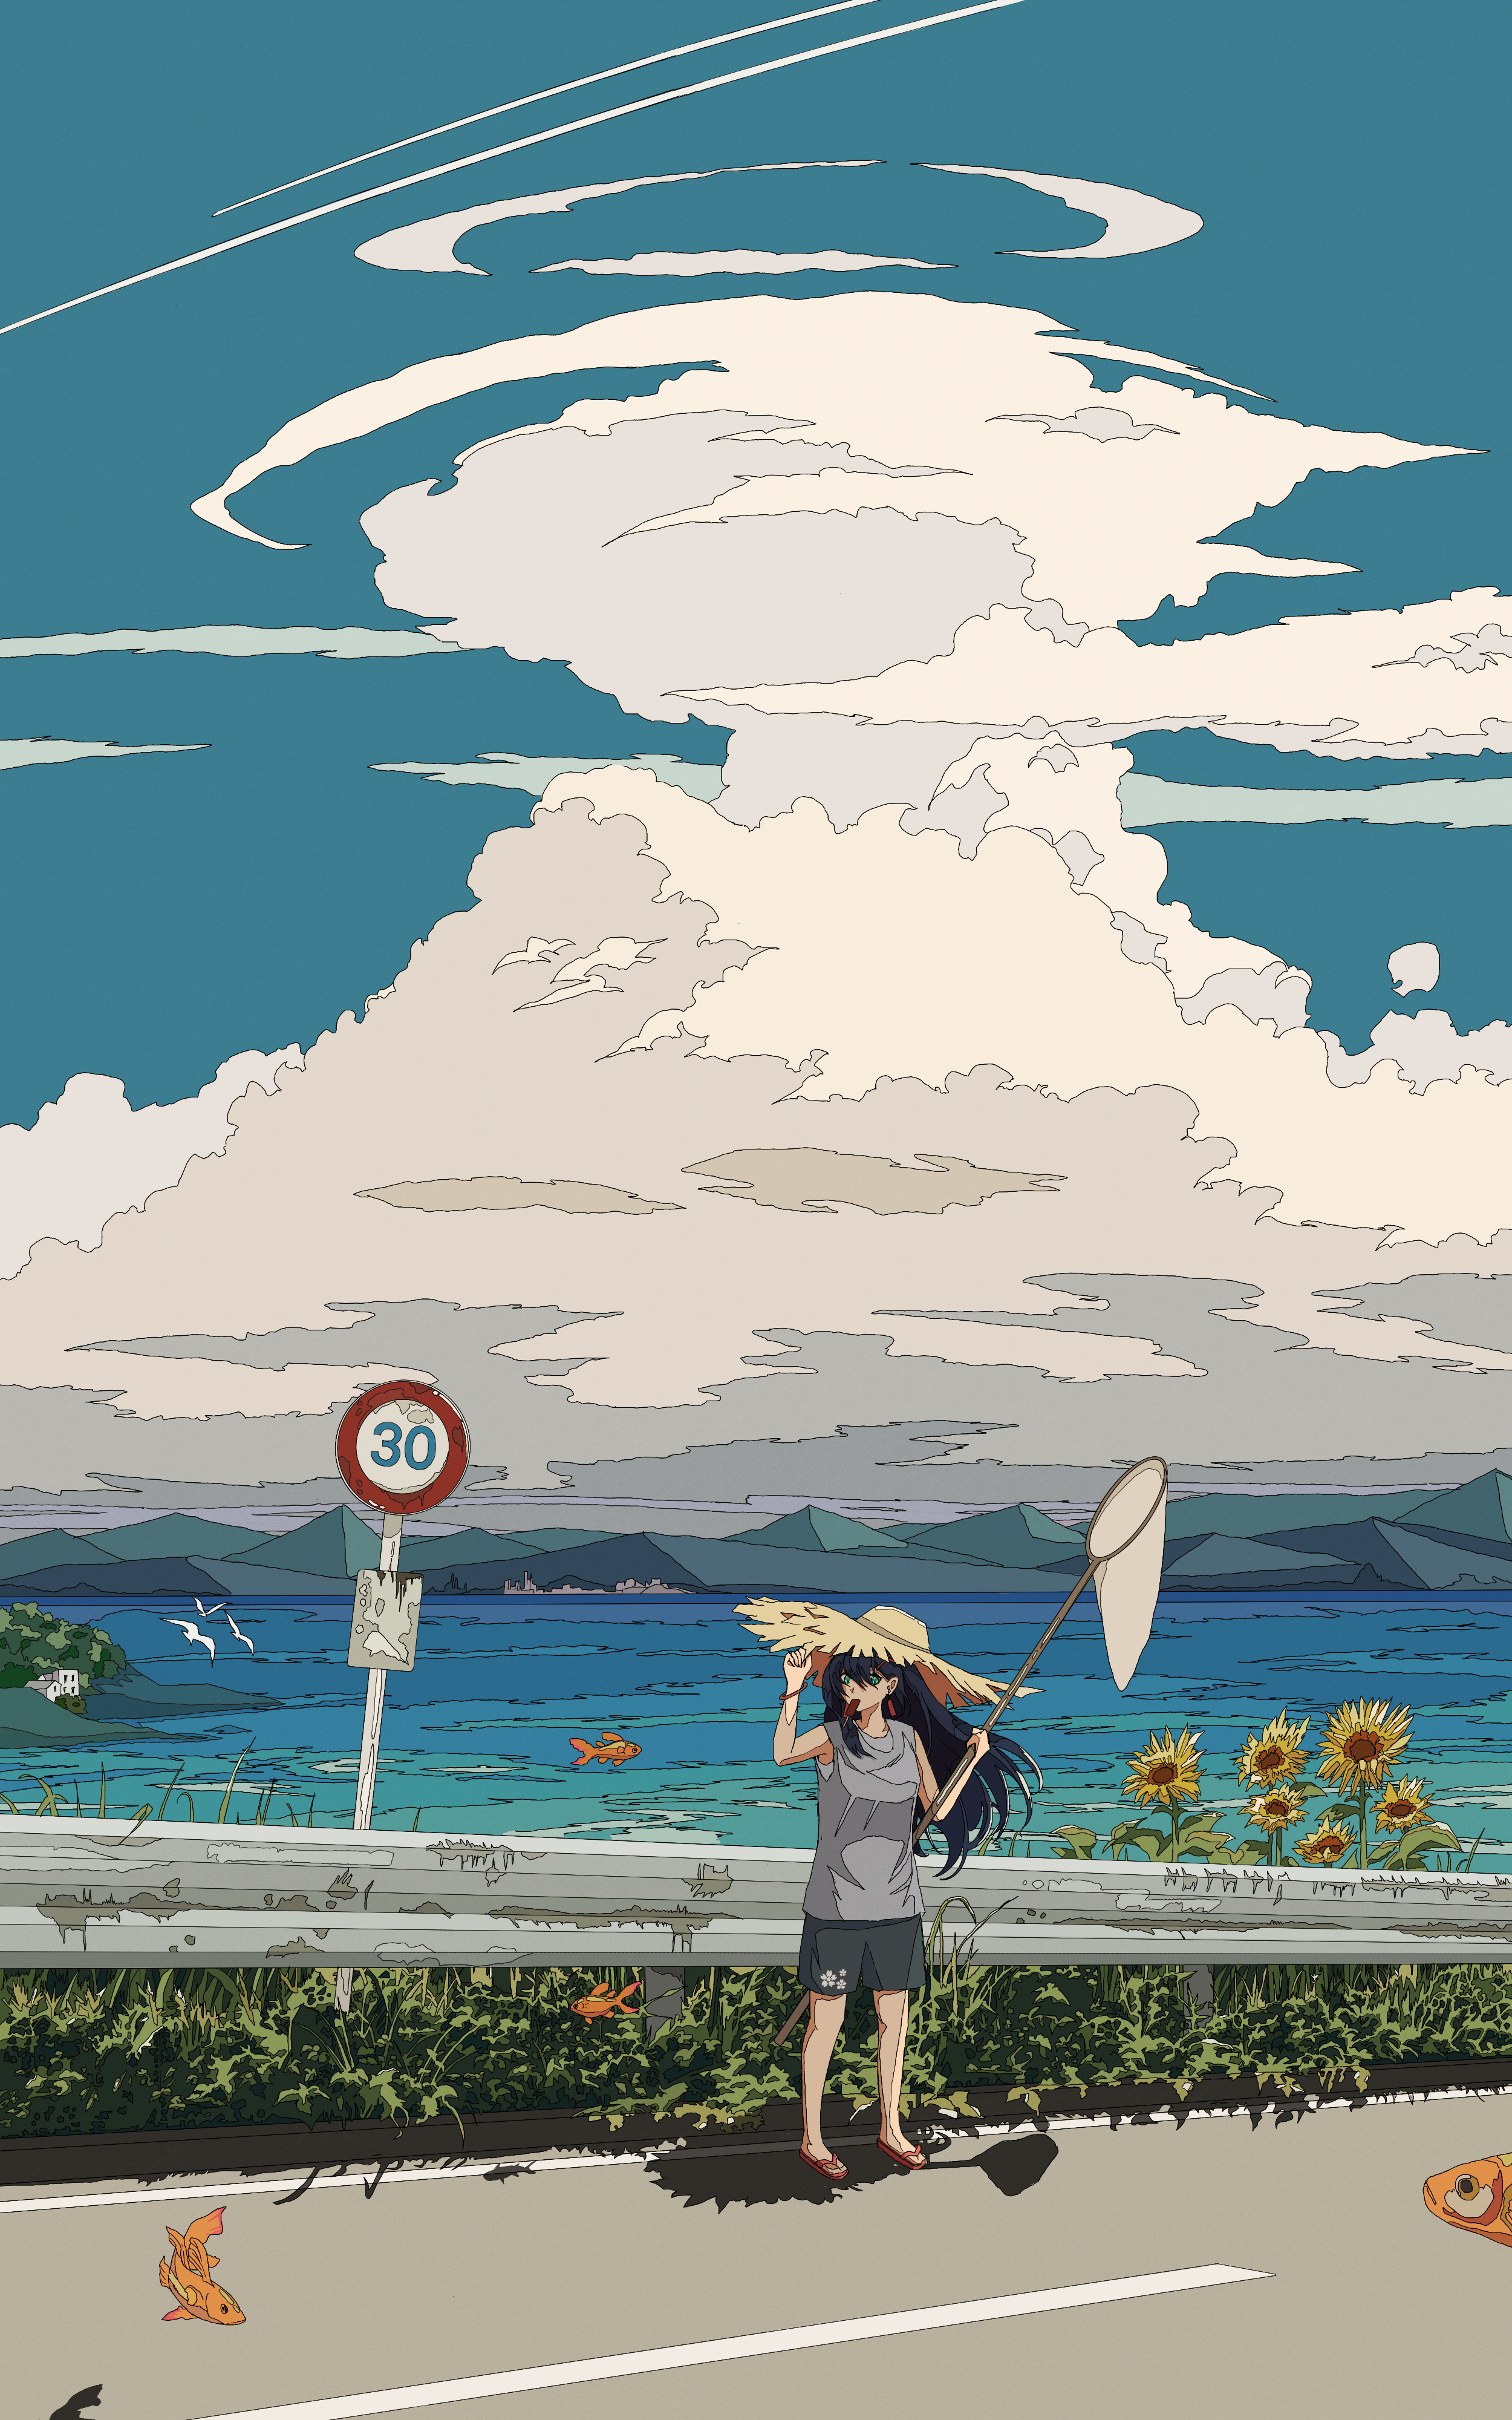 Anime 2500x4000 illustration environment portrait display road sea water flowers mountains road sign clouds landscape